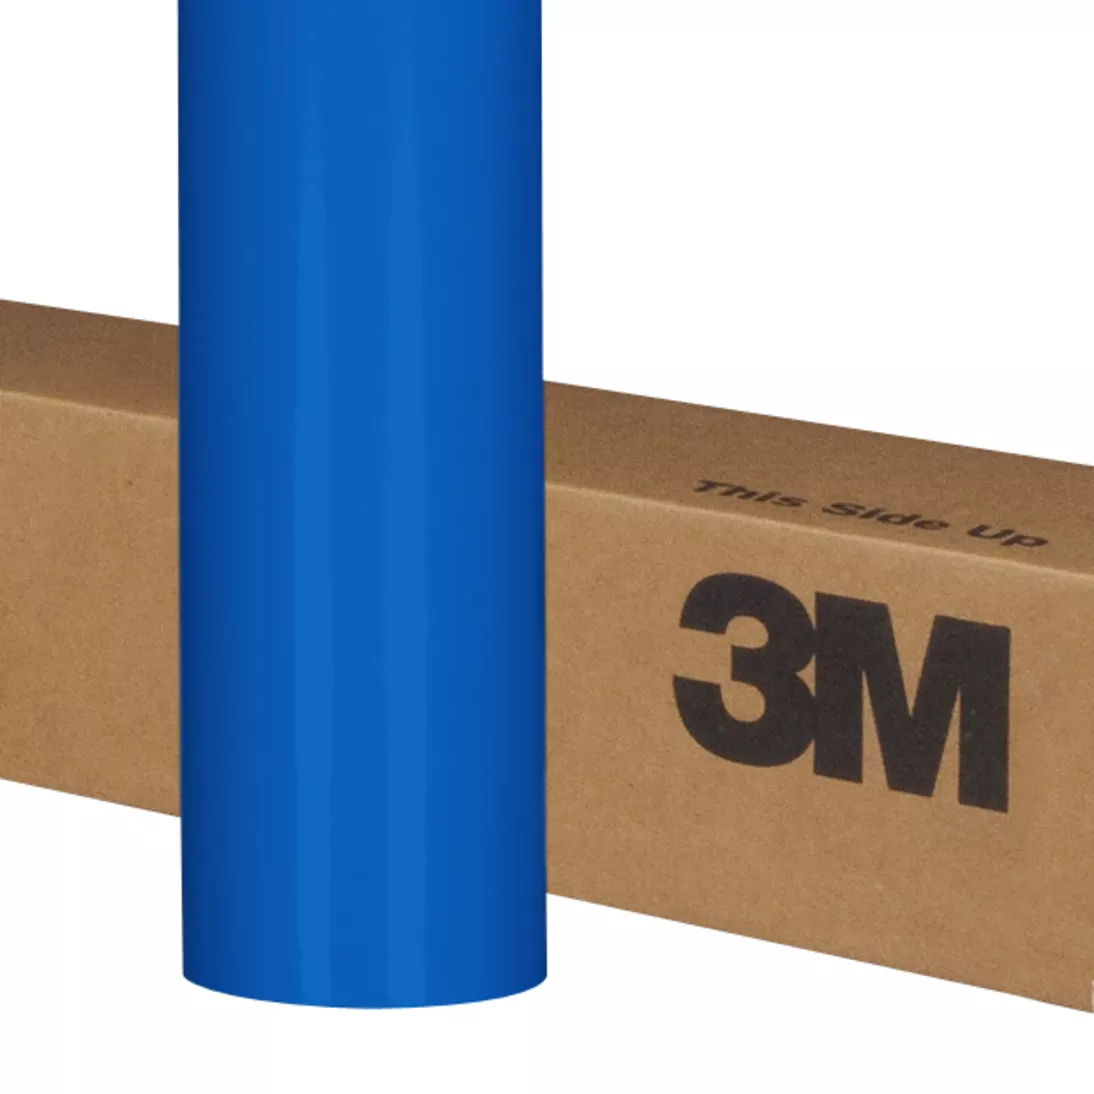 3M™ Controltac™ Graphic Film with Comply™ Adhesive 180mC-57, Olympic
Blue, 48 in x 50 yd, 1 Roll/Case